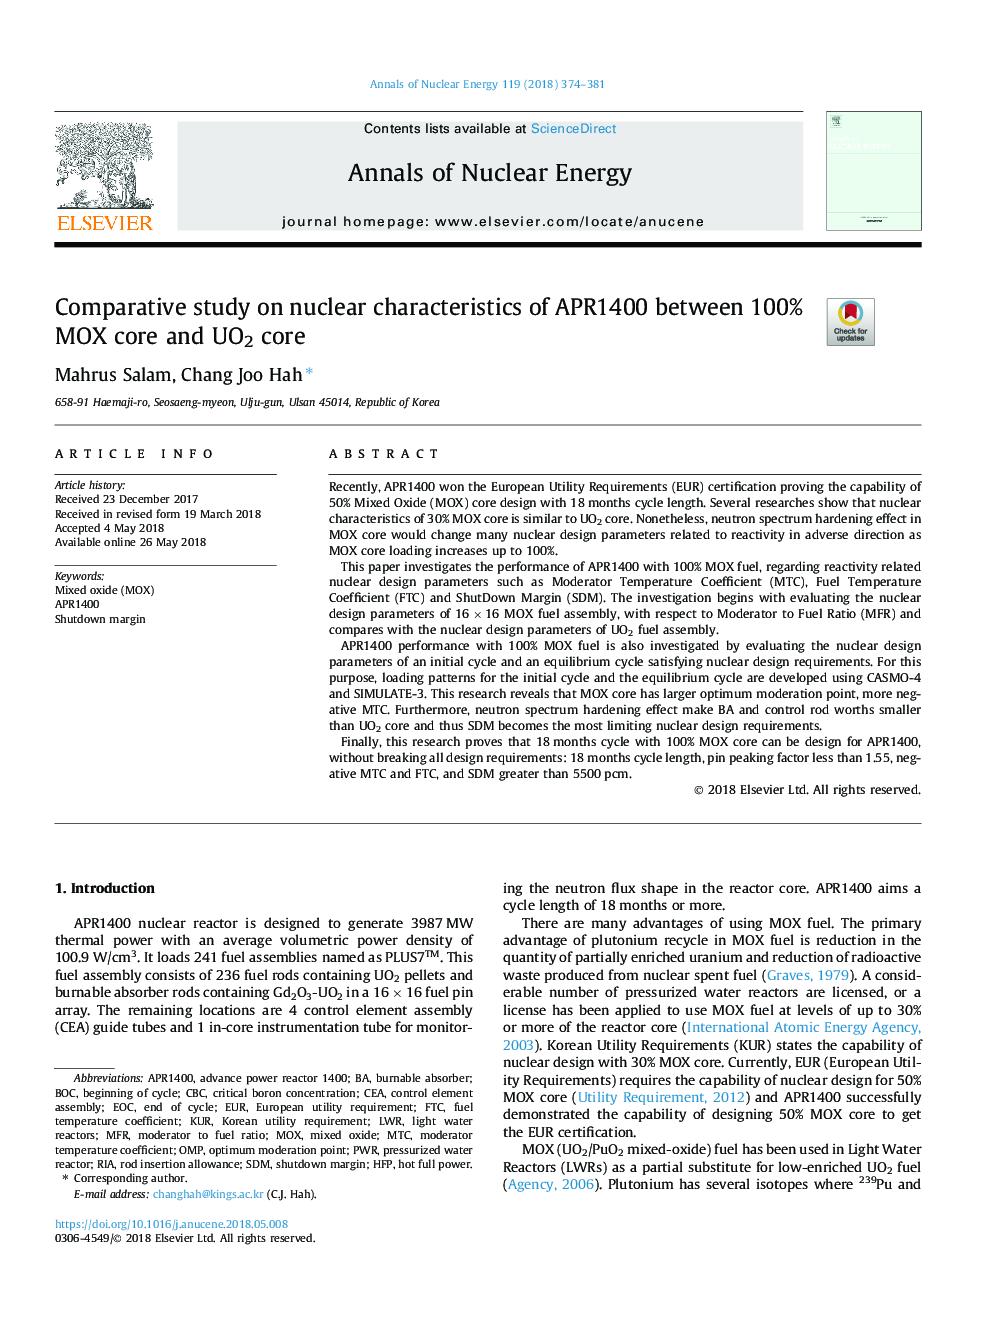 Comparative study on nuclear characteristics of APR1400 between 100% MOX core and UO2 core